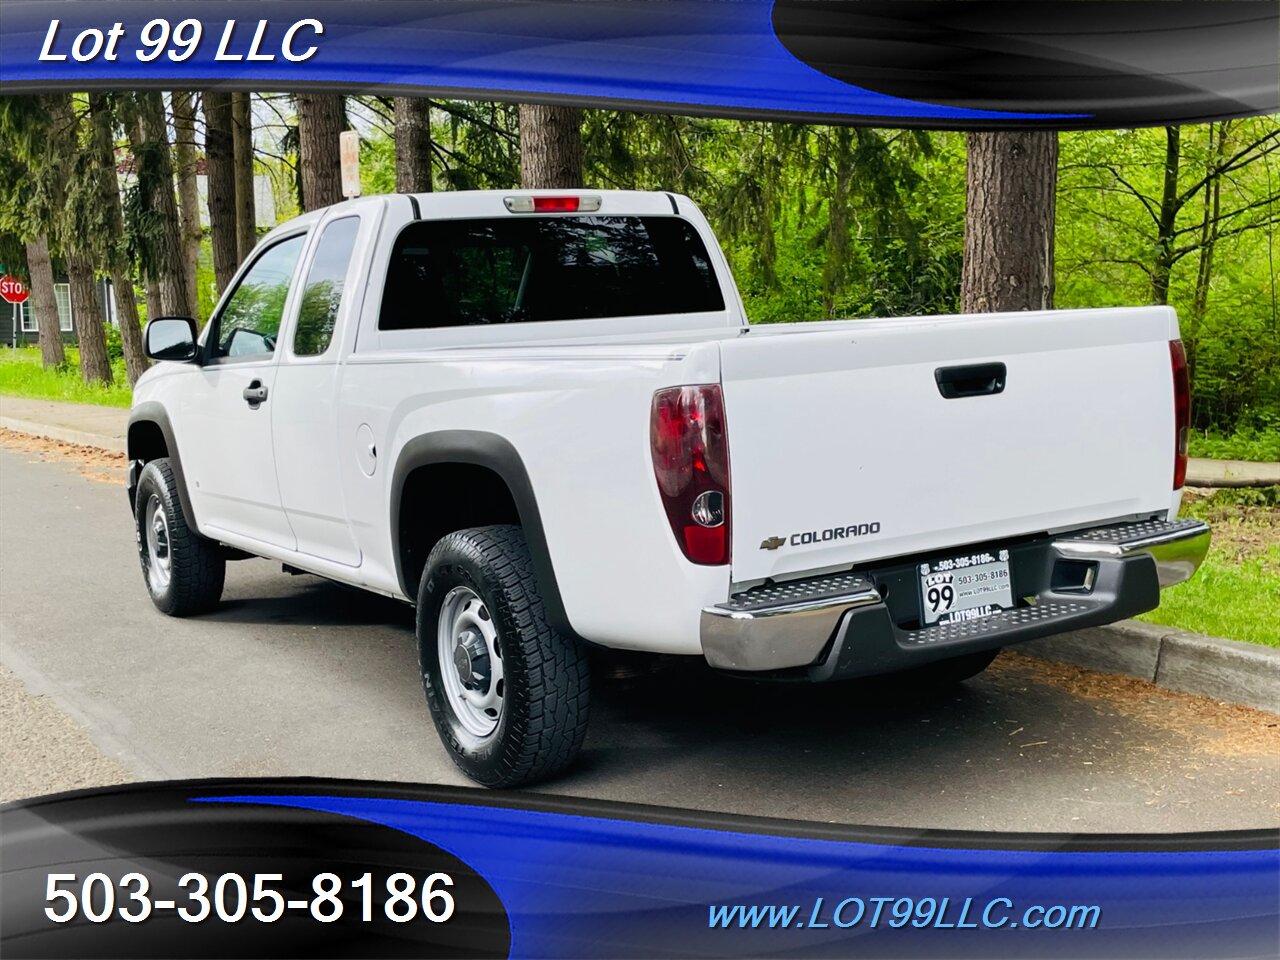 2007 Chevrolet Colorado Extended Cab LT 4x4 6' Bed Vortec 3.7L I5 242hp   - Photo 8 - Milwaukie, OR 97267